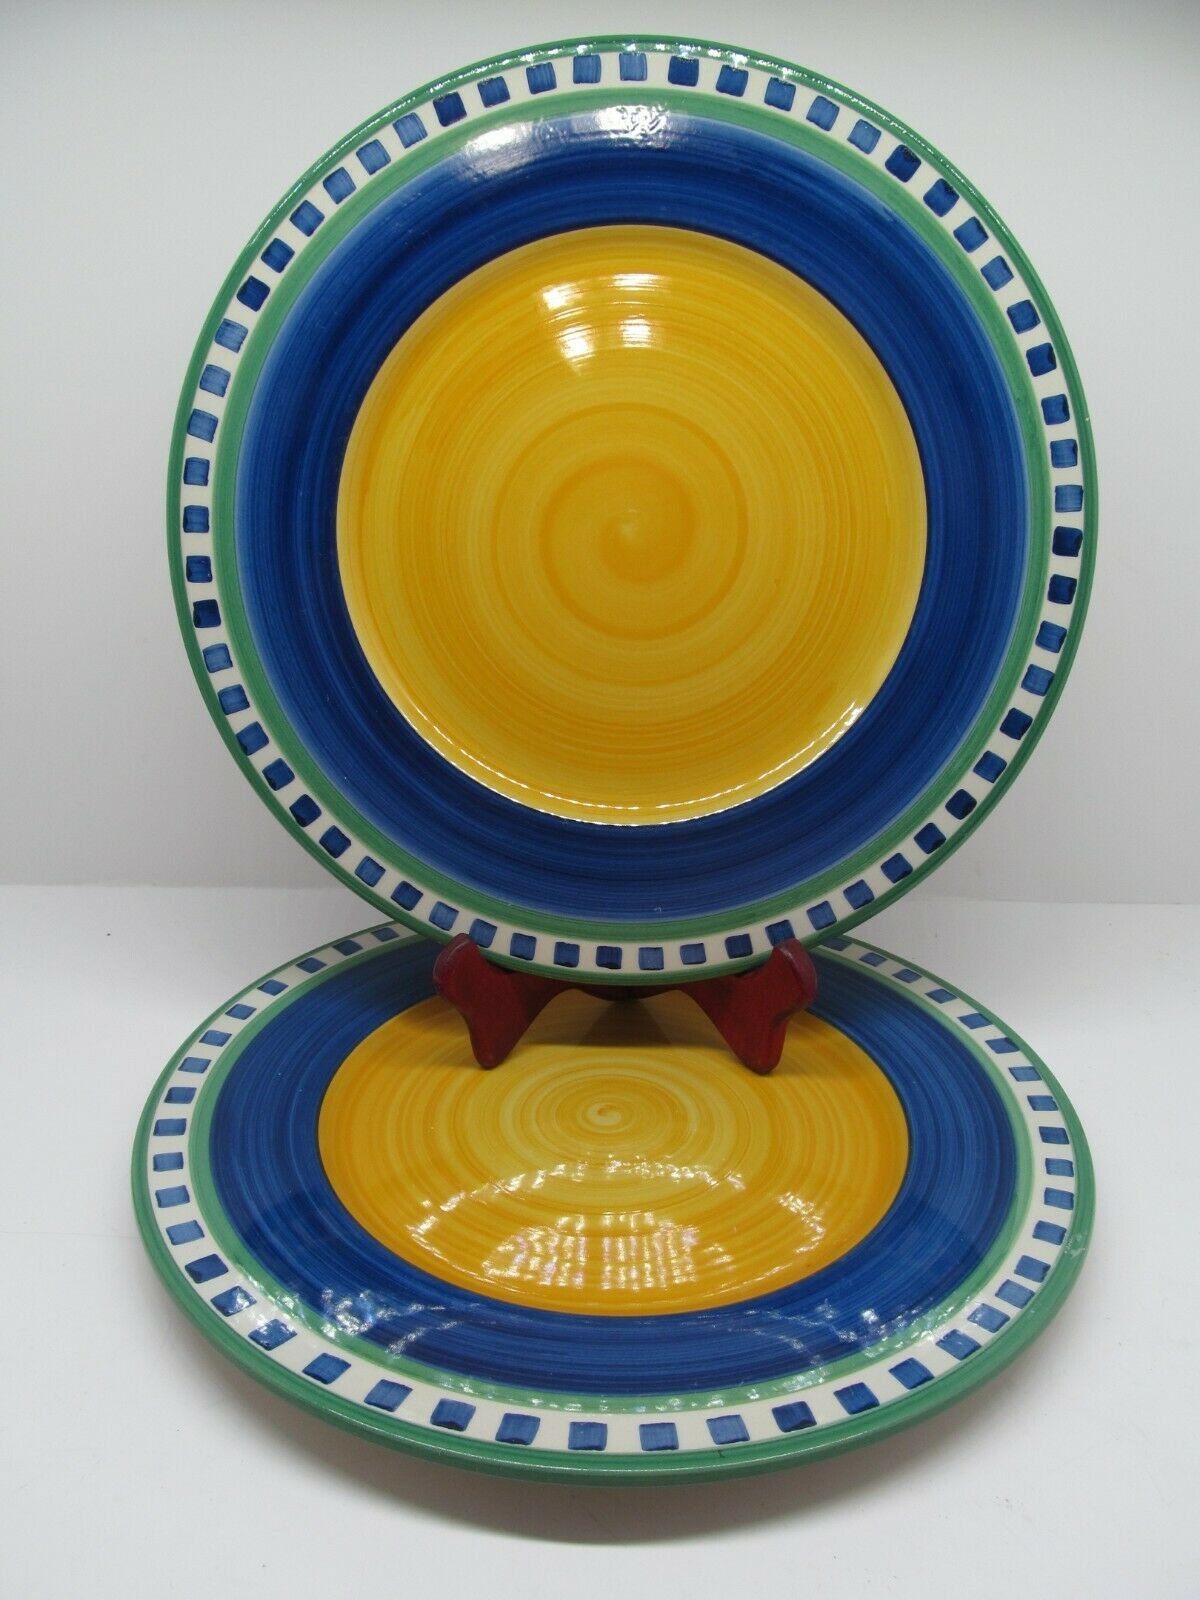 Primary image for Mikasa Firenze 13" Charger or Chop Plates Serving Platters Set of 2   Portugal